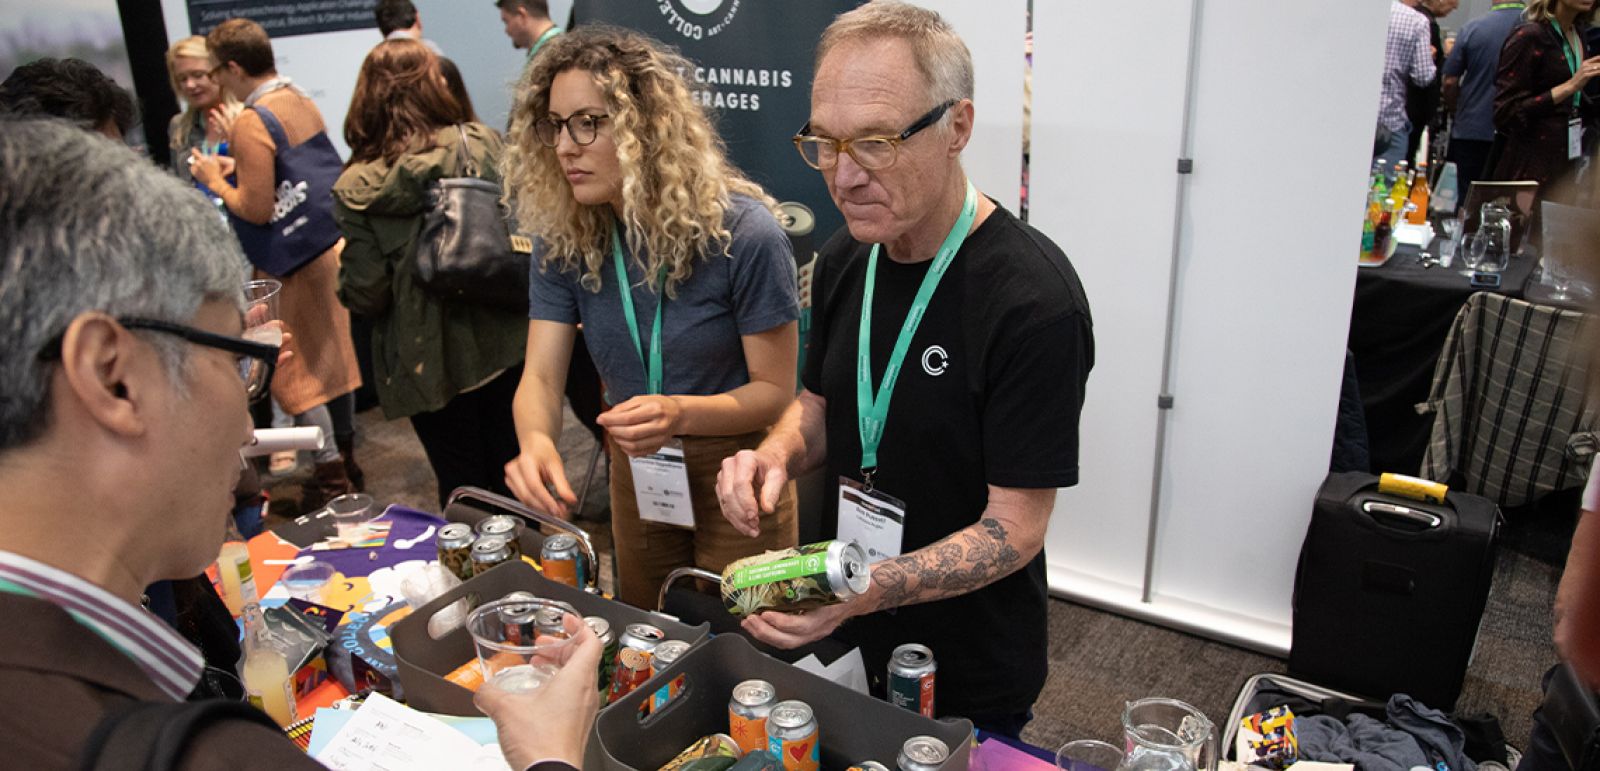 Photo for: Looking ahead to the Action at the 2021 Cannabis Drinks Expo in San Francisco